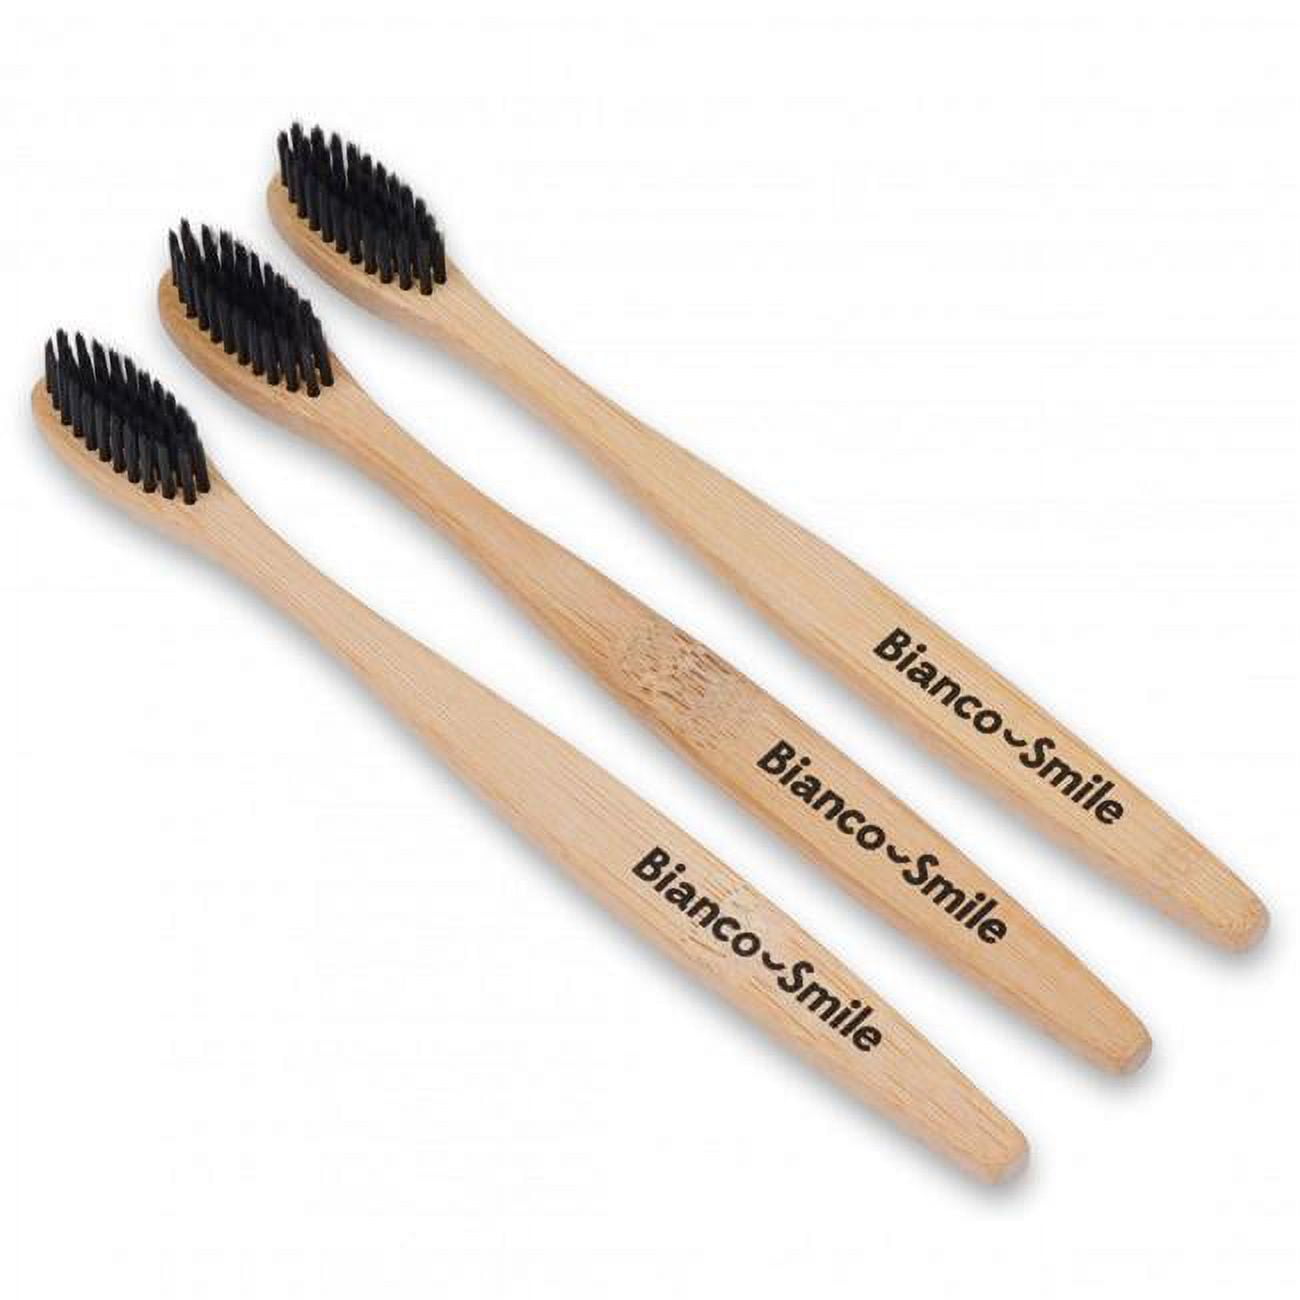 Picture of Bianco Smile BUN007 Premium Bamboo Charcoal Toothbrush - Set of 3